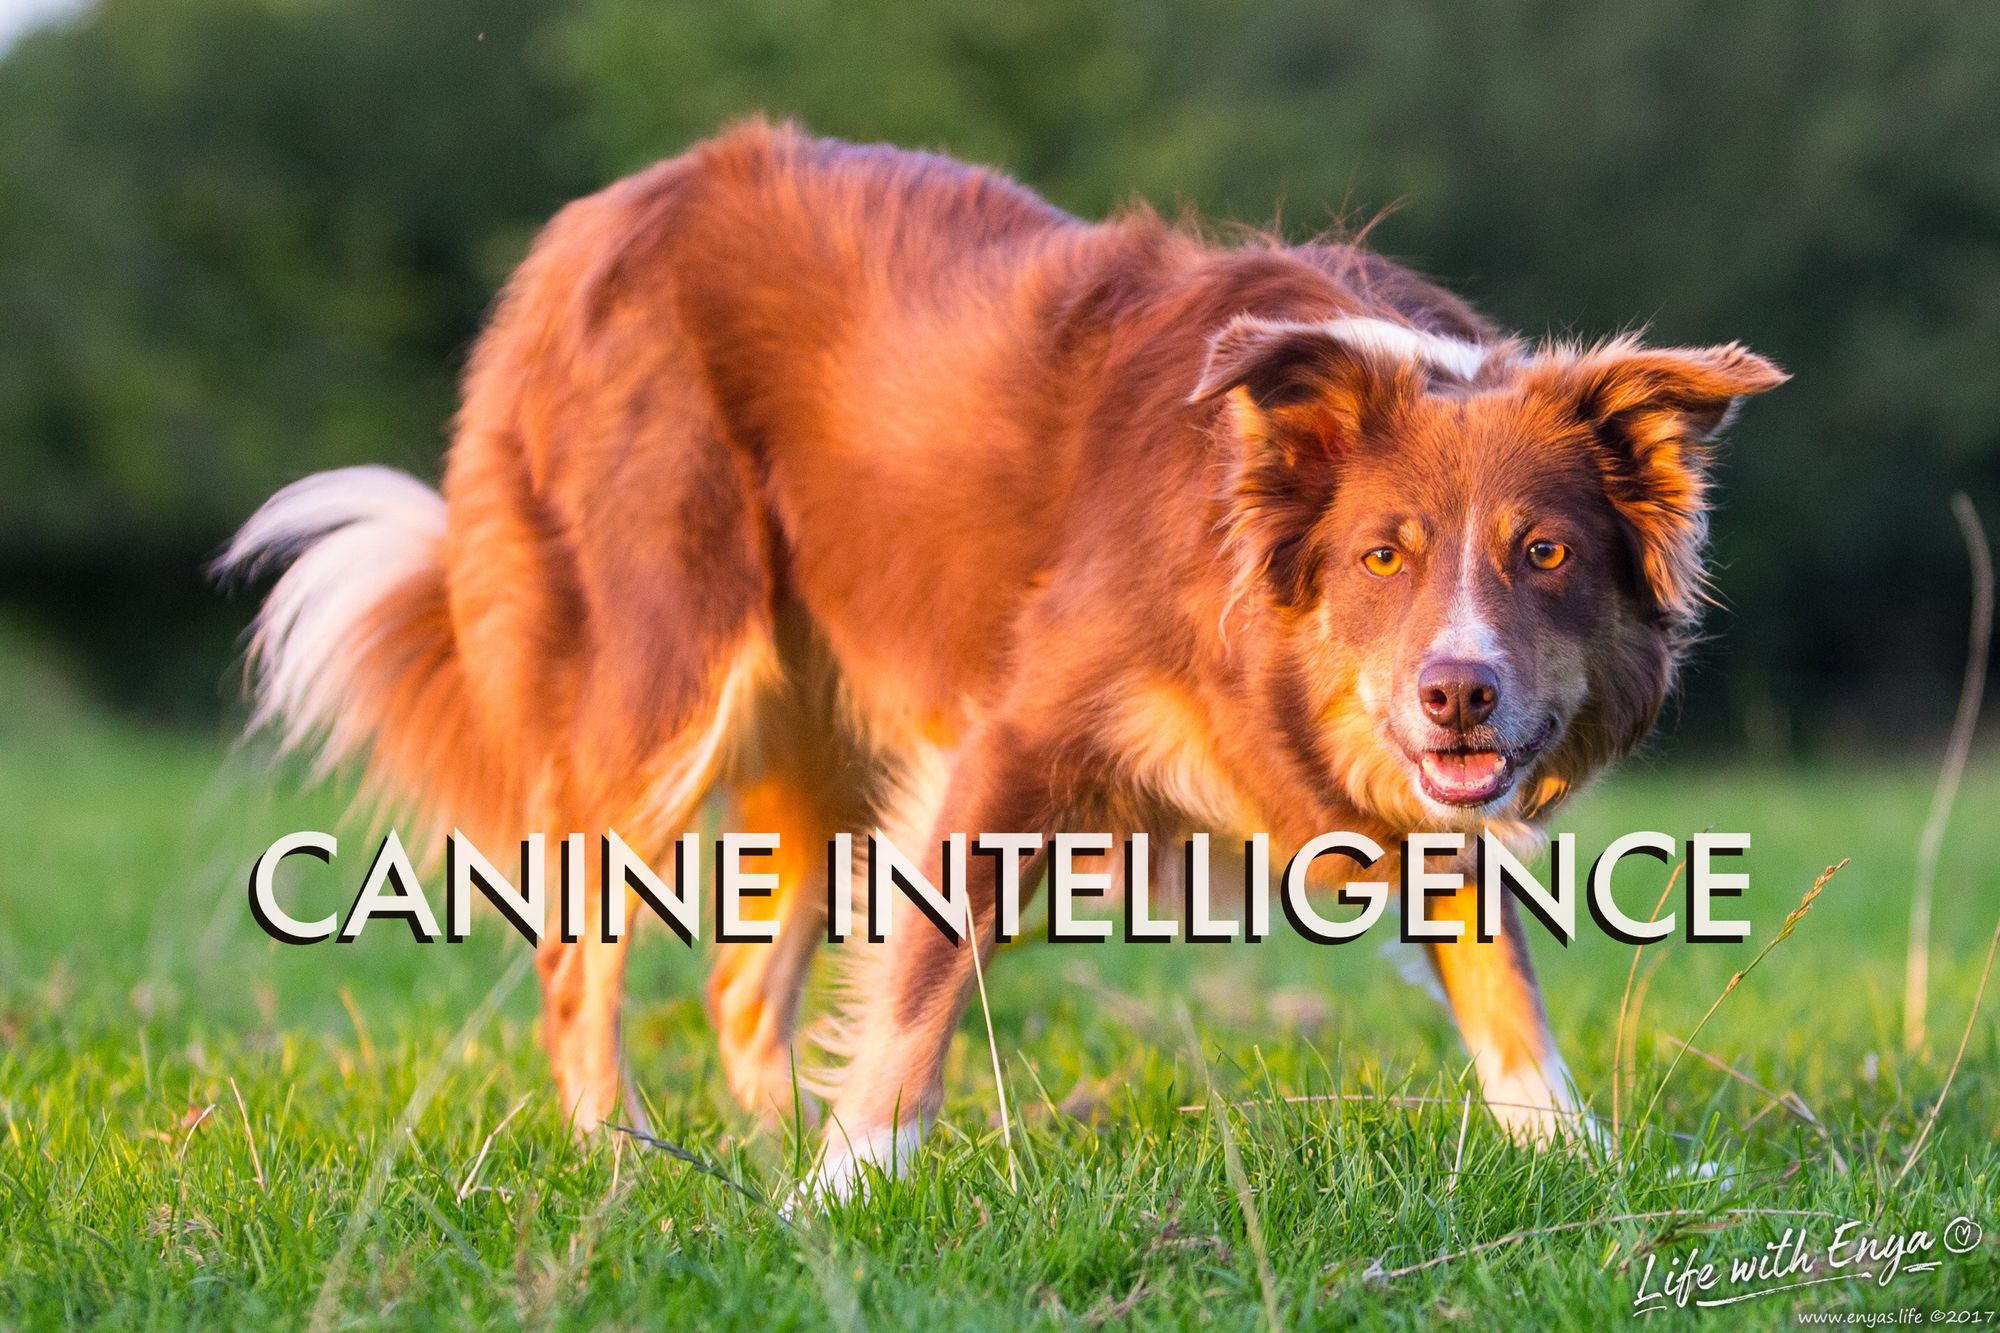 Canine intelligence - and the lack of it in some intelligence researchers